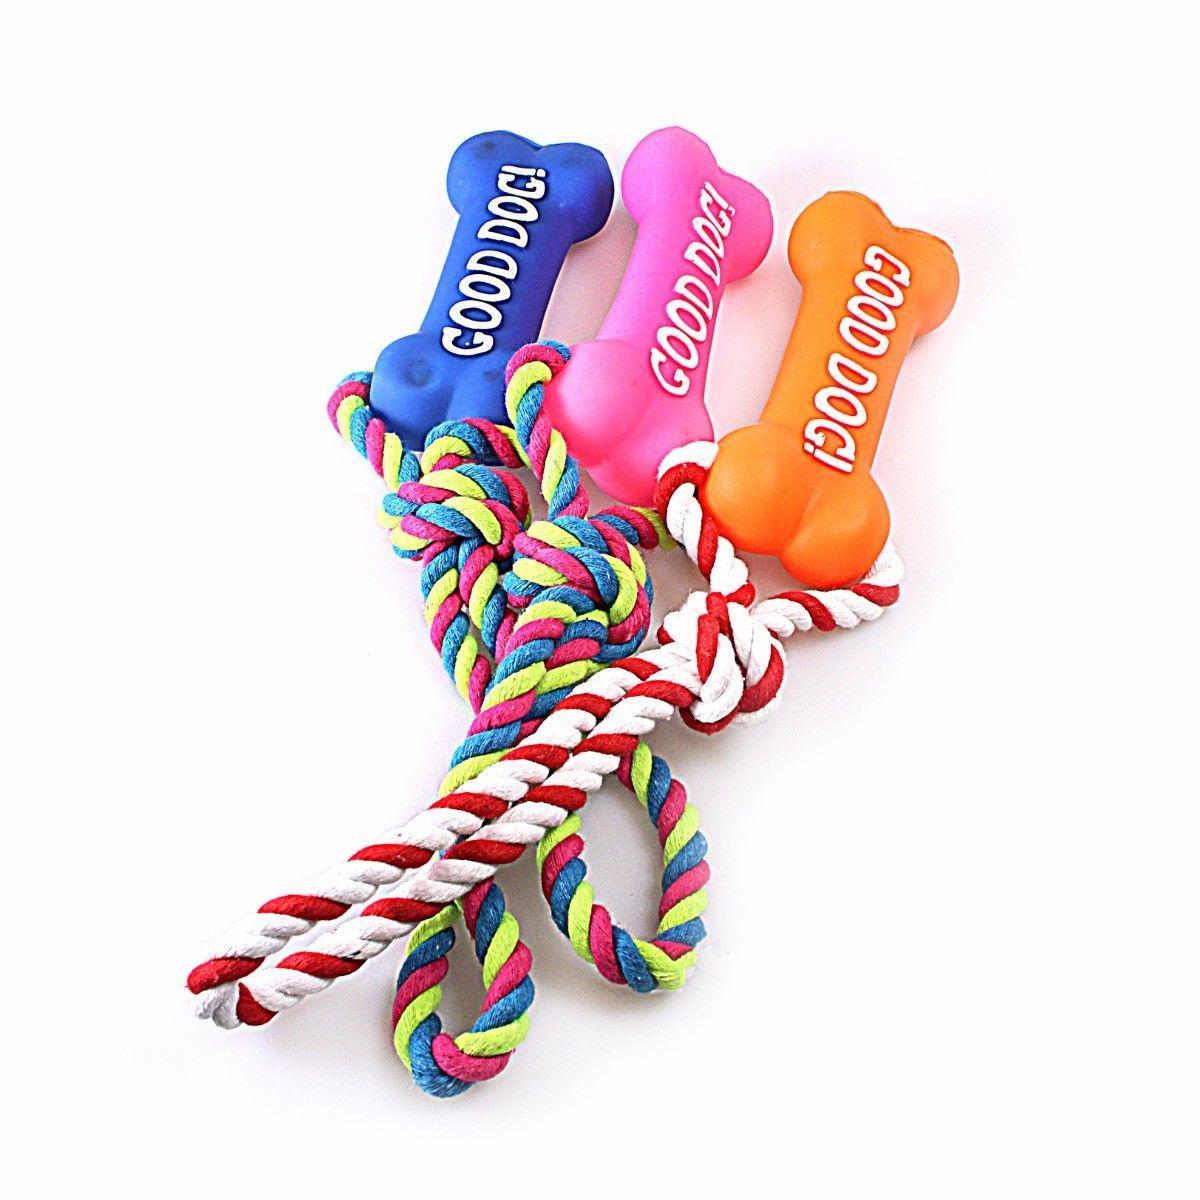 Cute Dog / Puppy Bone Toy 'Good Dog' with Rope Chewing Squeezable Toy Assorted Colours 4609 (Parcel Rate)